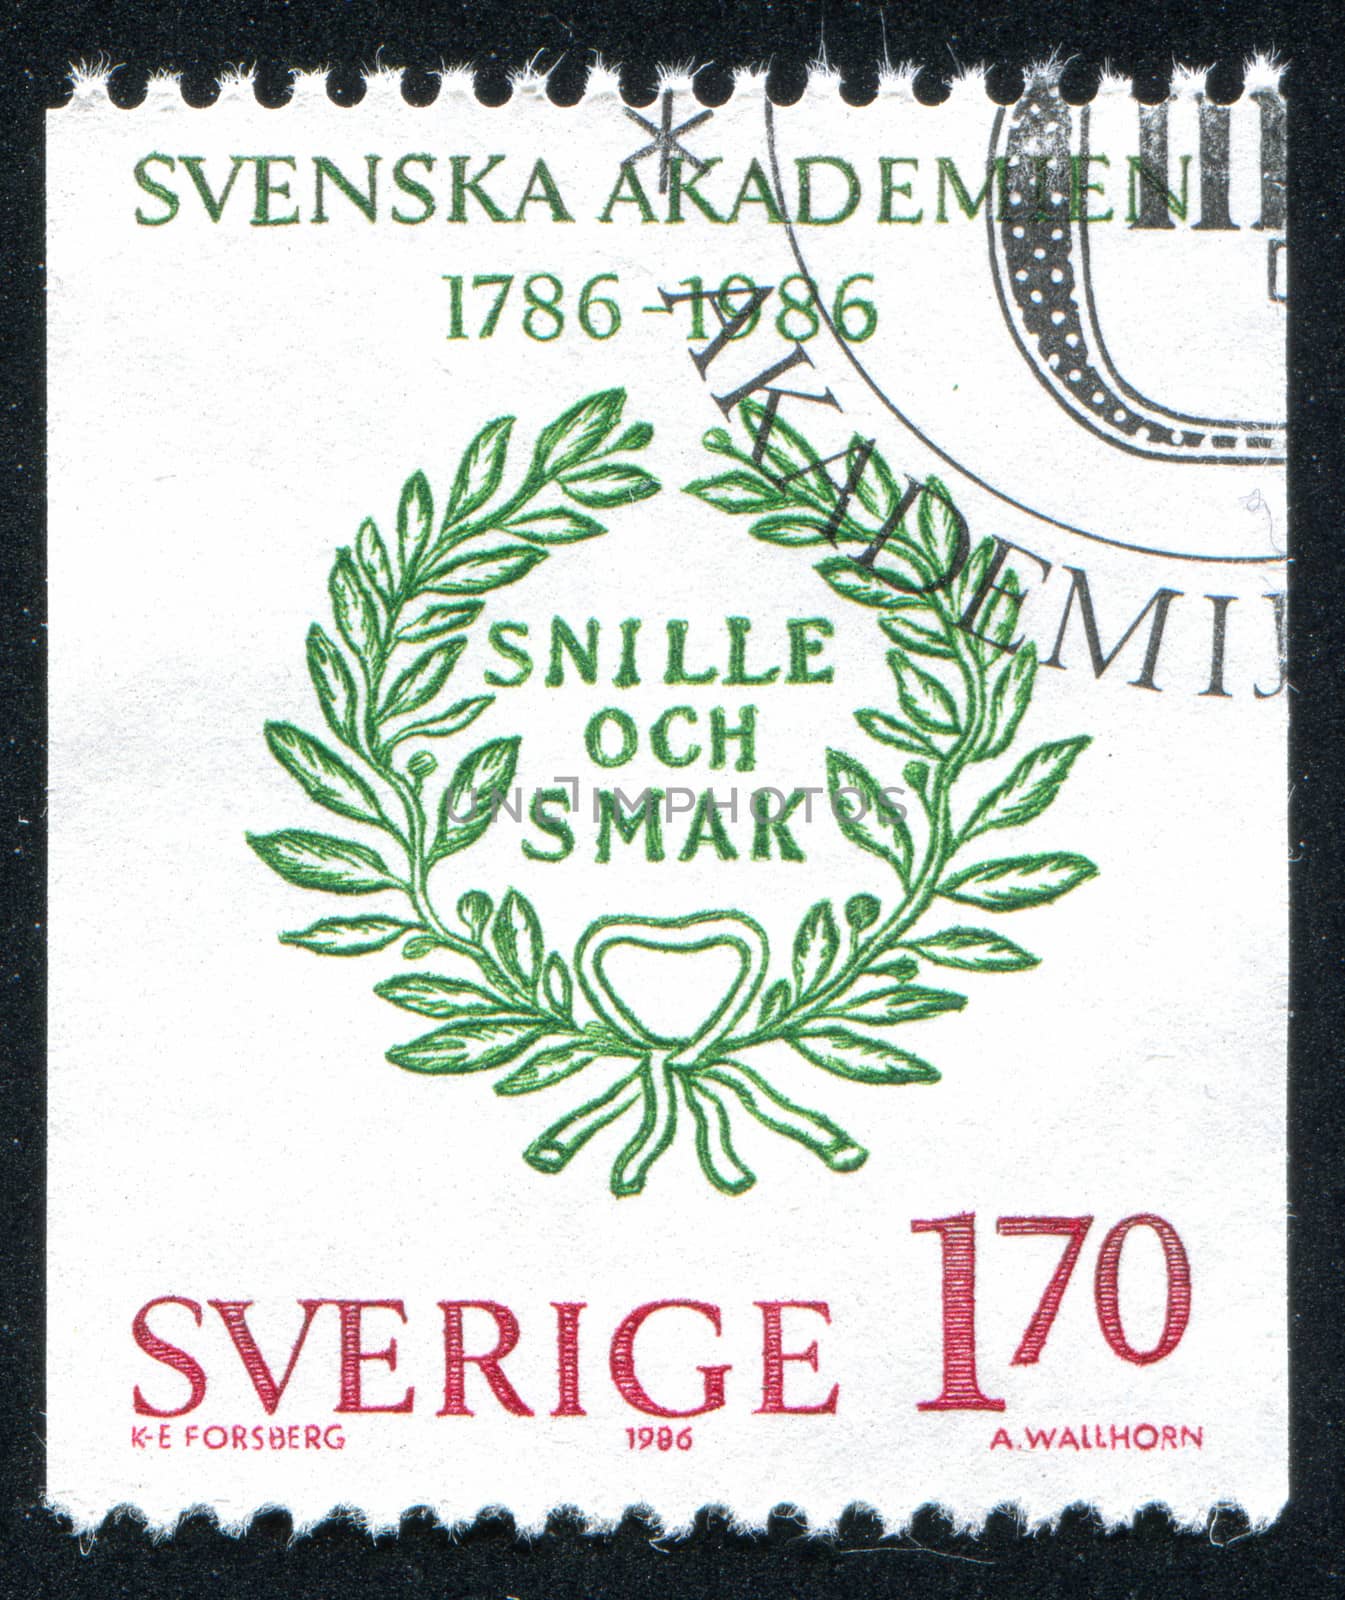 SWEDEN - CIRCA 1986: stamp printed by Sweden, shows Motto of the Swedish Academy, circa 1986